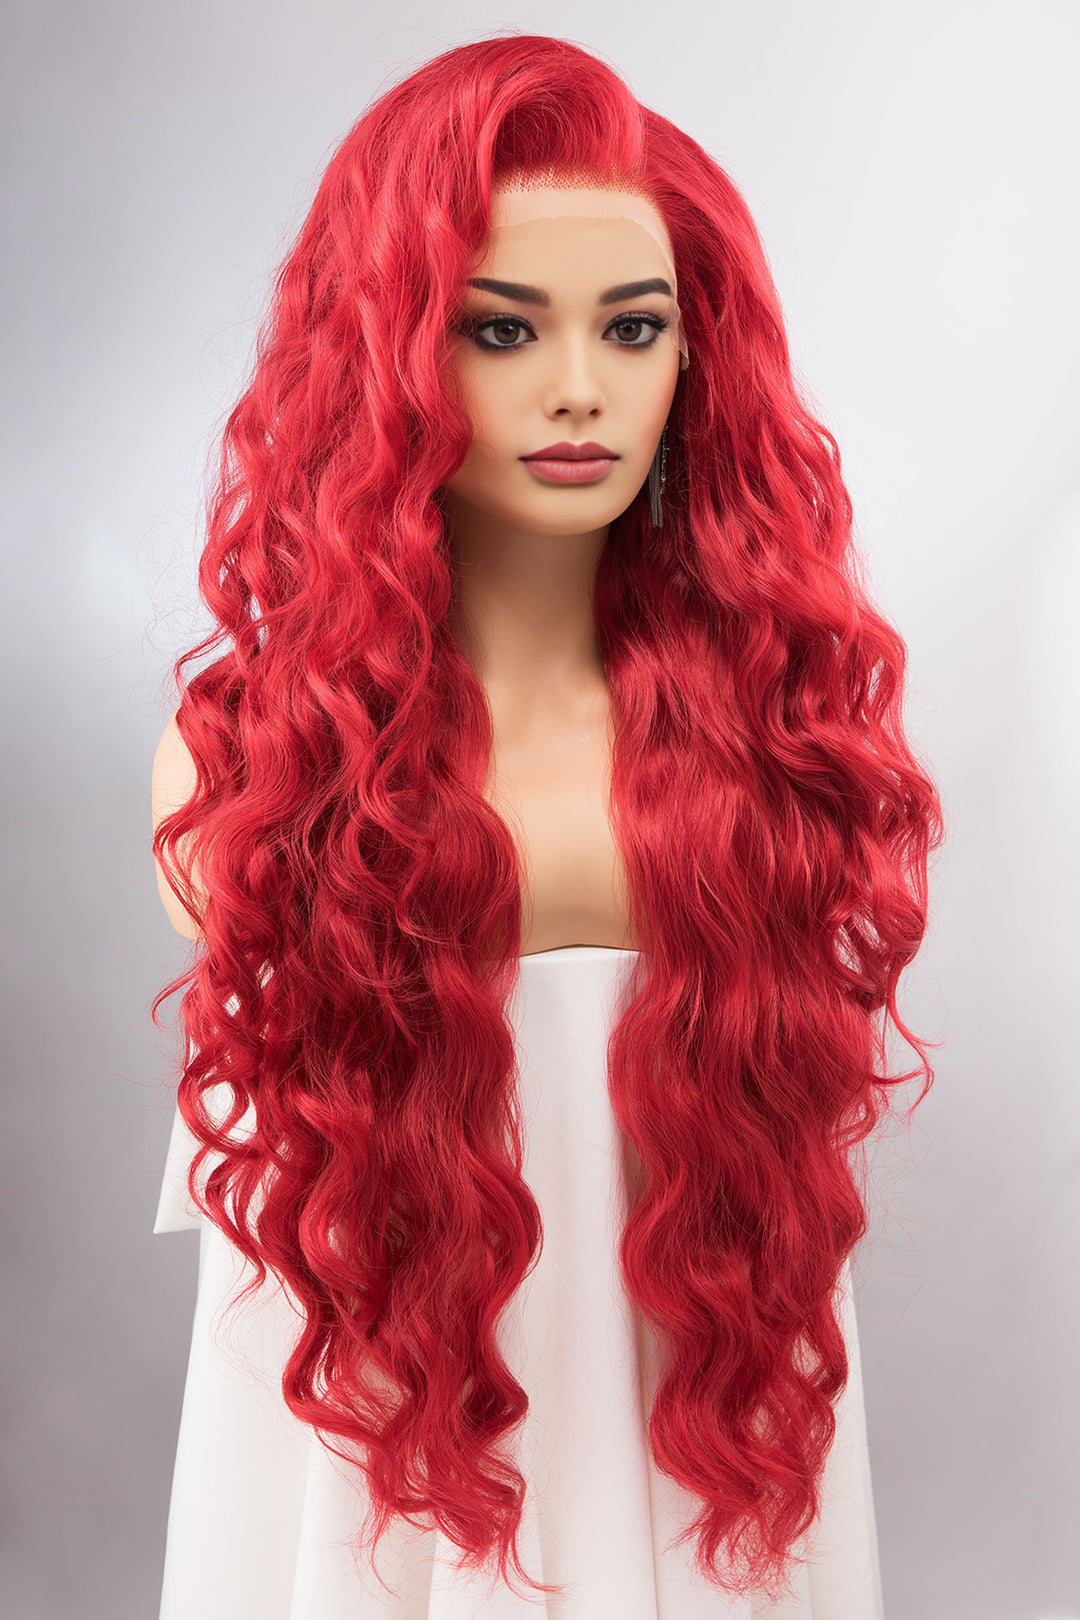 Red Wig Long Lace Front Wig Little Mermaid Wig Aquaman Mera Cosplay Wig 13" X 4" Large Lace Front Wavy Long Wig Drag Queen Wig AMAYA